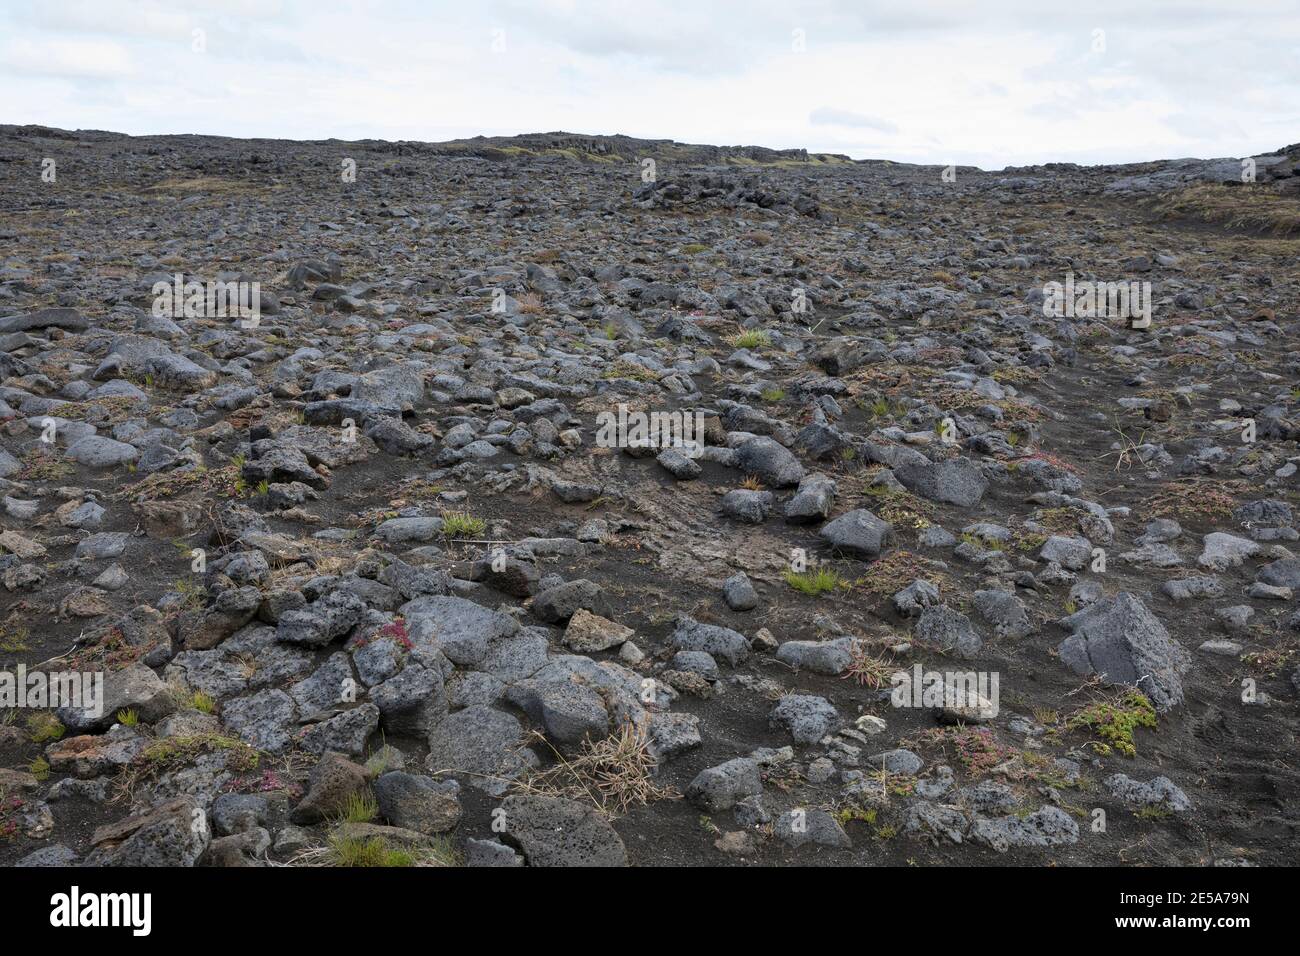 volcanic landscape with lichens and mosses, Iceland, Reykjanes Peninsula Stock Photo